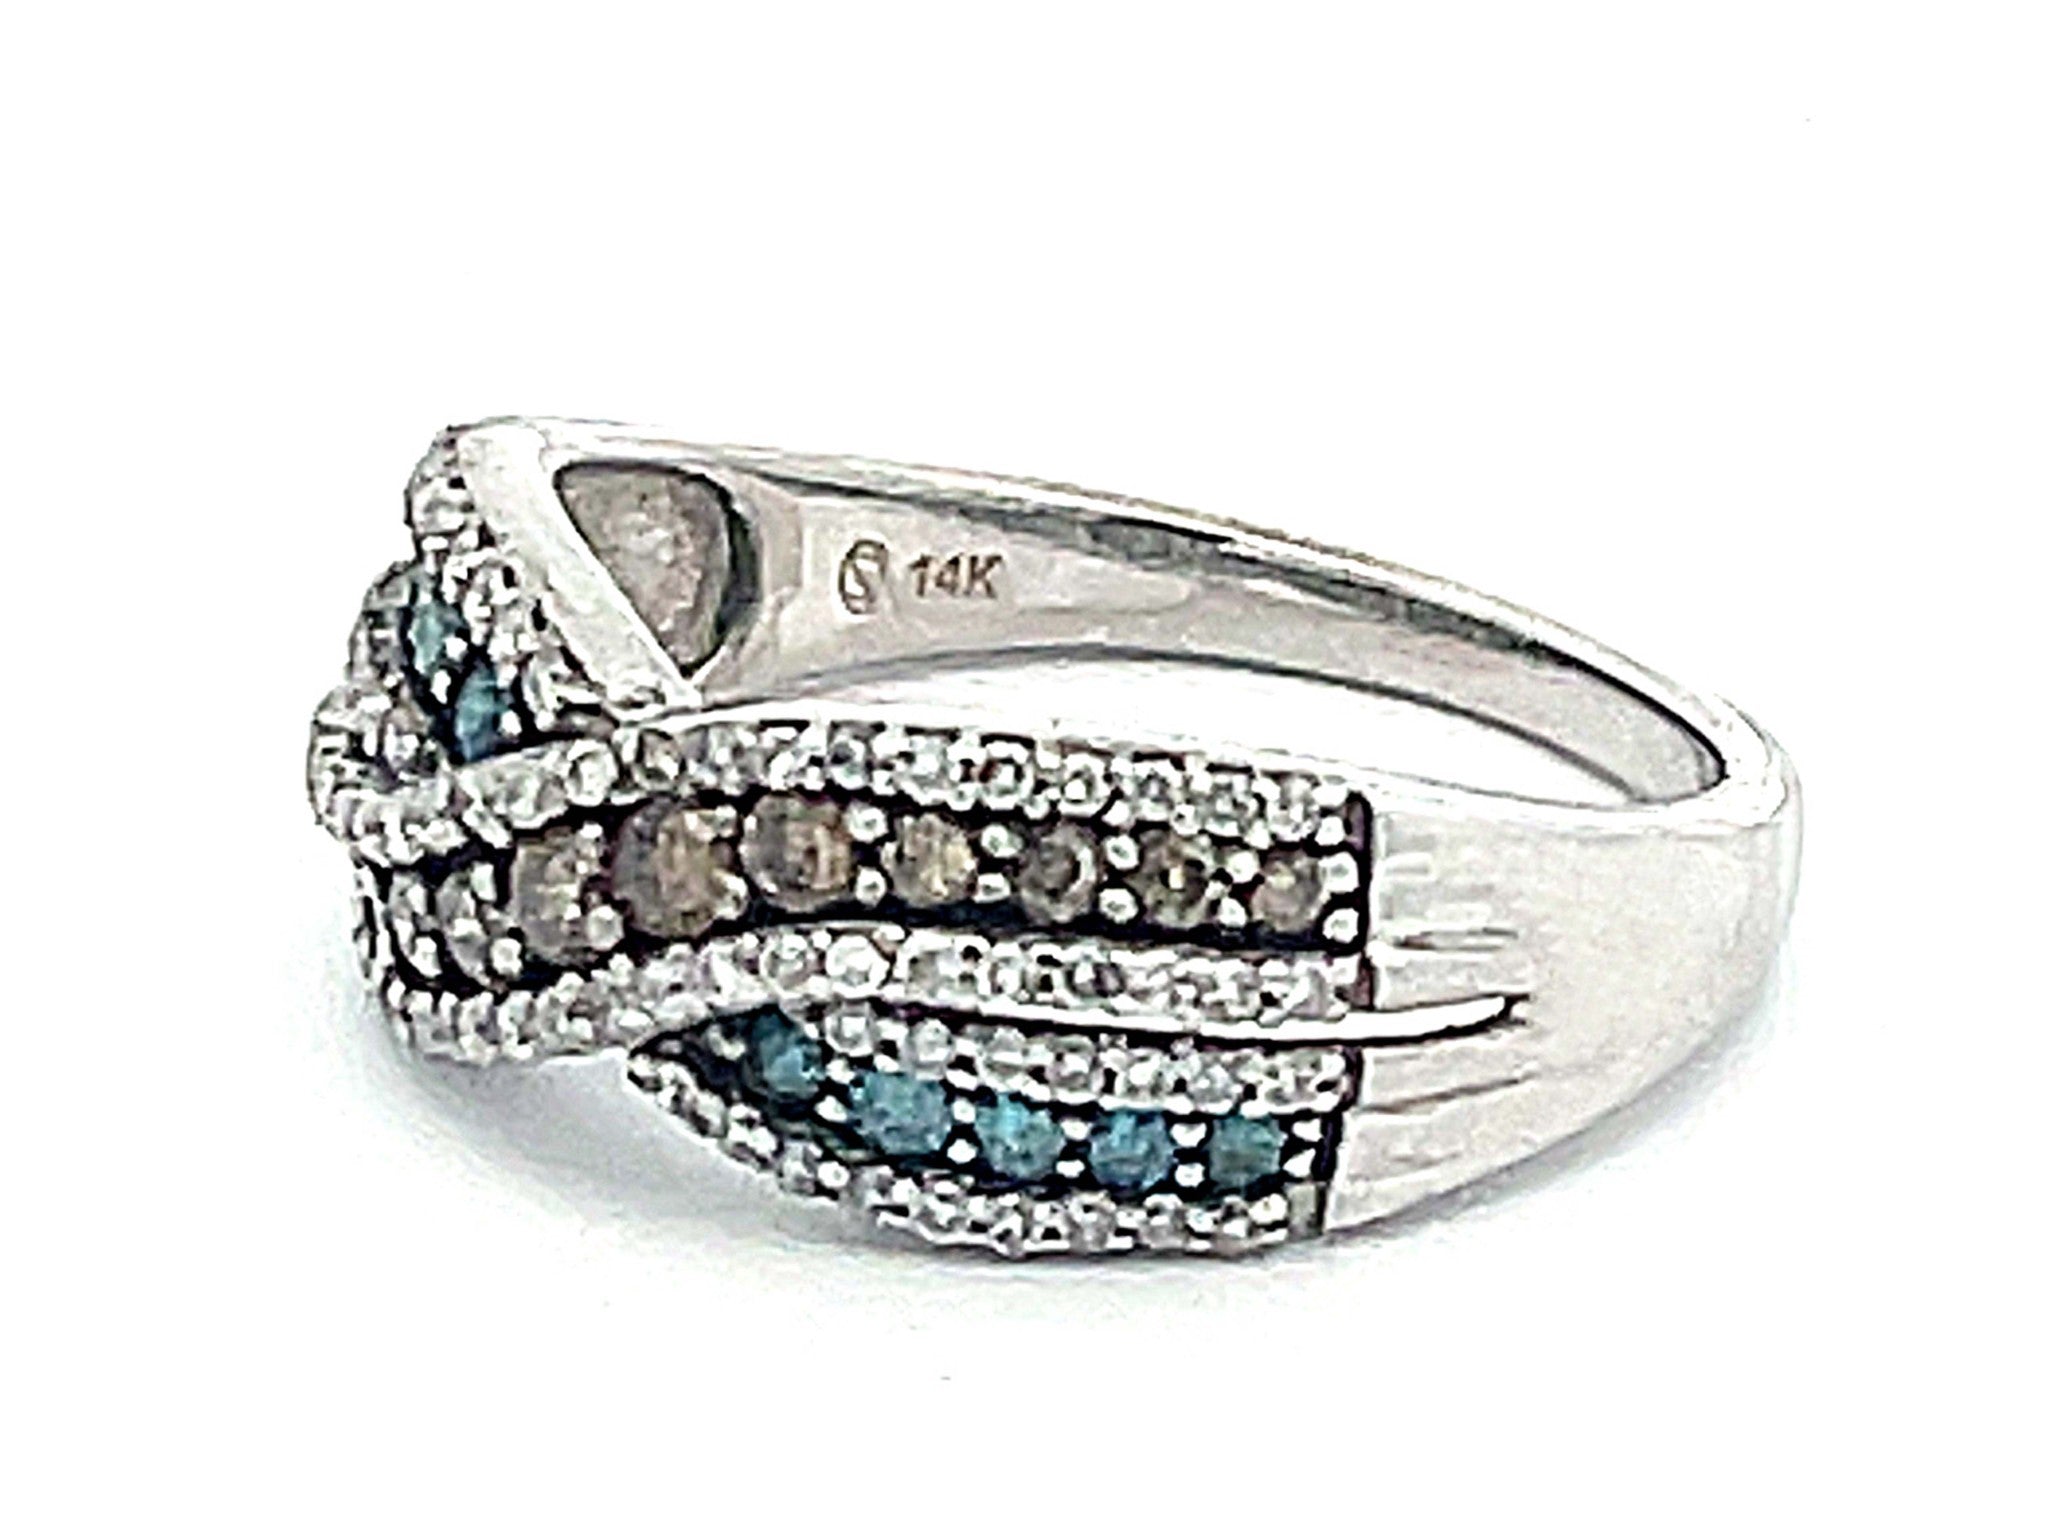 Blue, Chocolate and White Diamond Band Ring in 14k White Gold